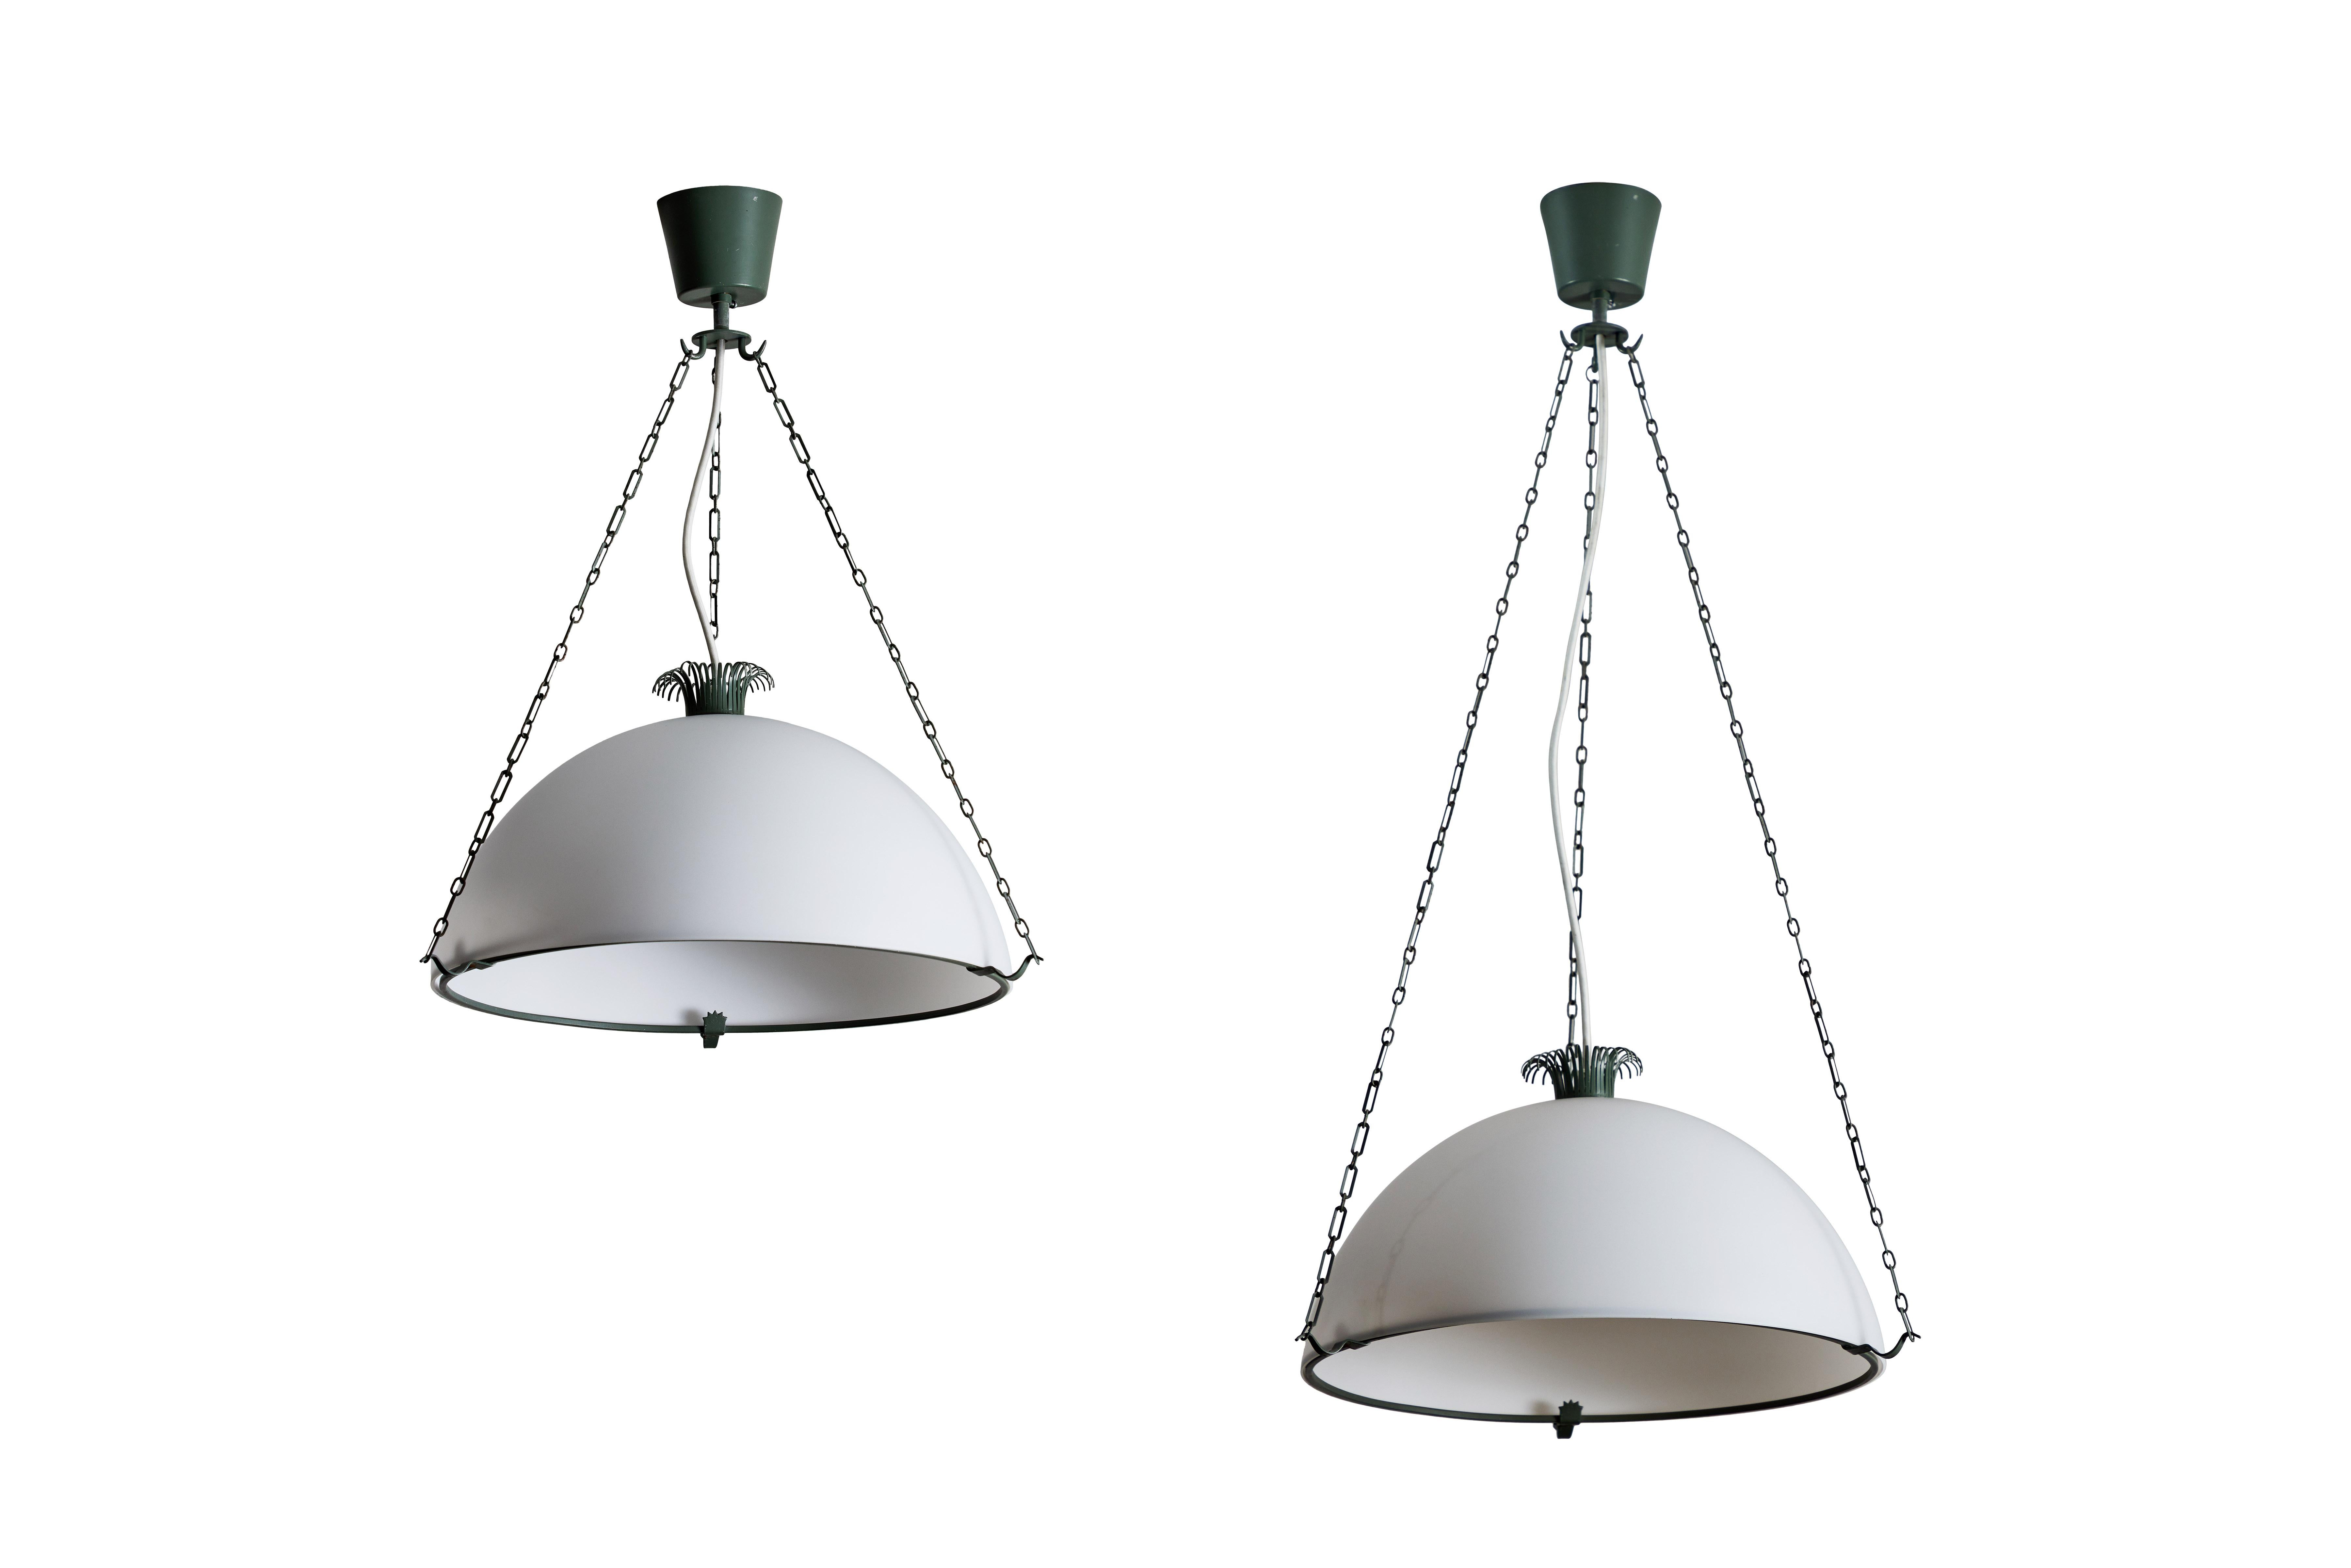 Rare Parachute suspension light by Erik Gunnar Asplund. Designed and manufactured in Sweden, circa mid-1920s mid-1930s. Enameled metal armature and chain, brushed satin glass diffuser. Rewired for U.S. junction boxes. Takes one E27 100w maximum